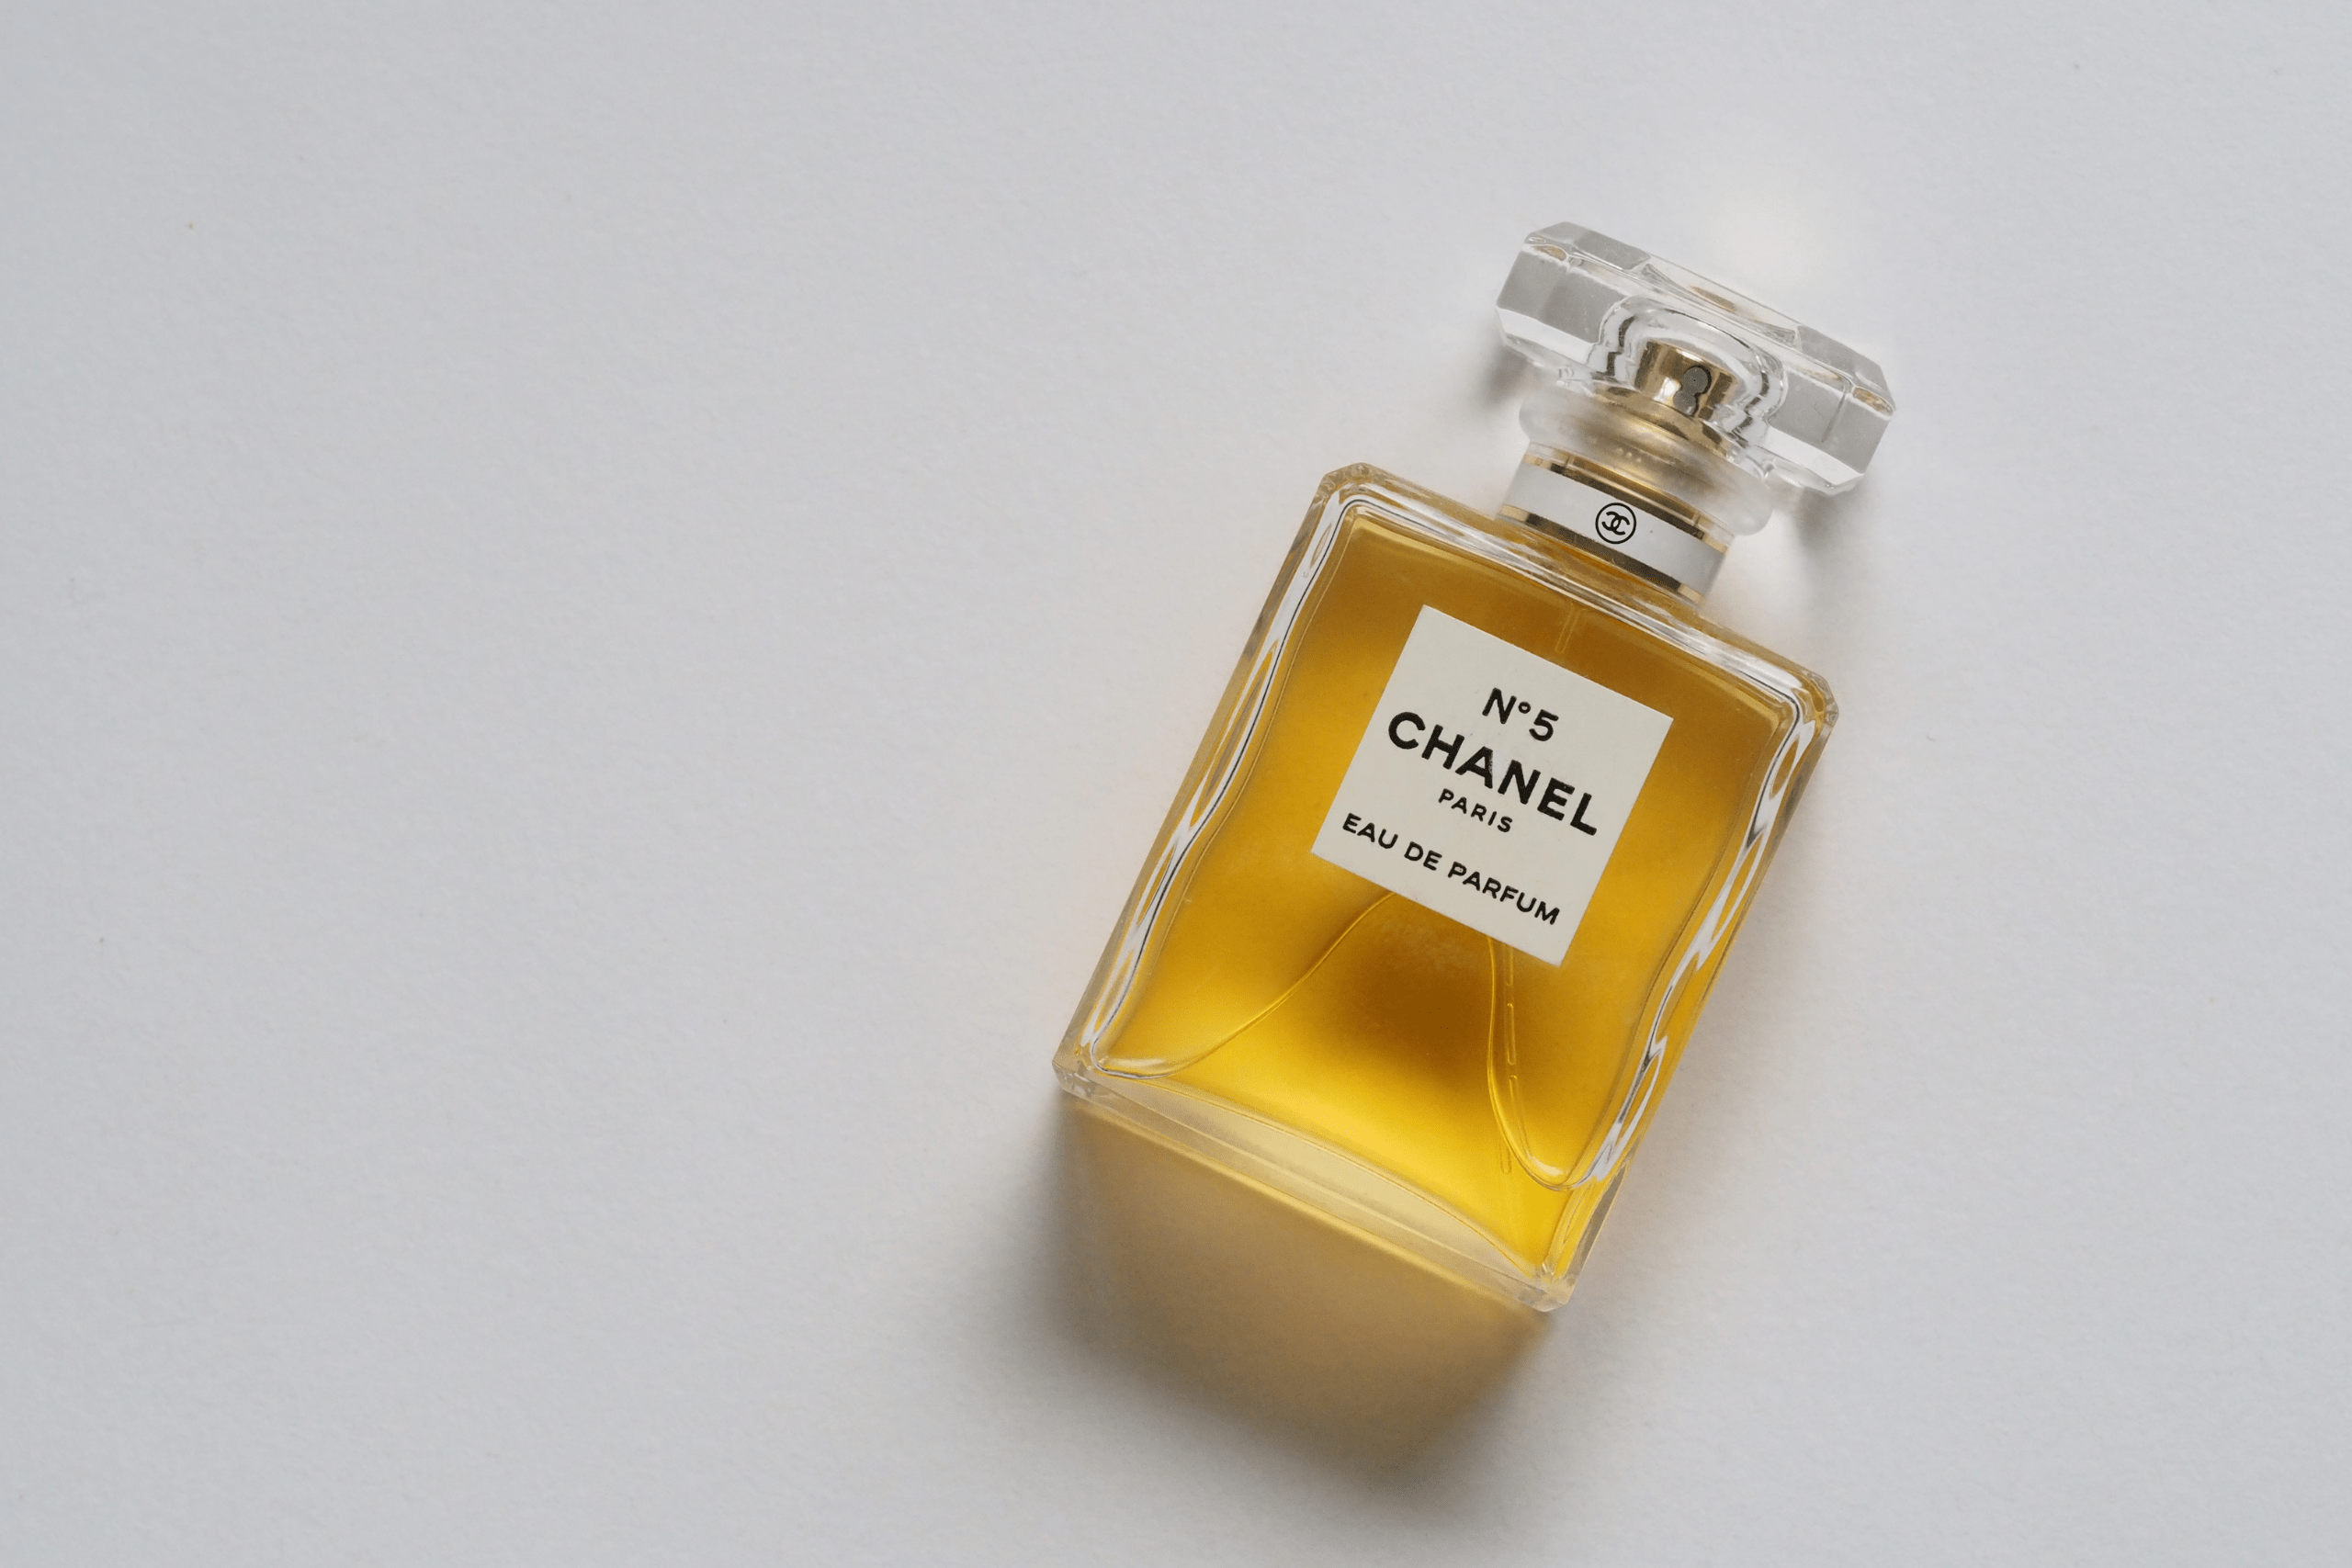 Image of perfume to introduce our blog titled 'Marketing for the Beauty Industry'